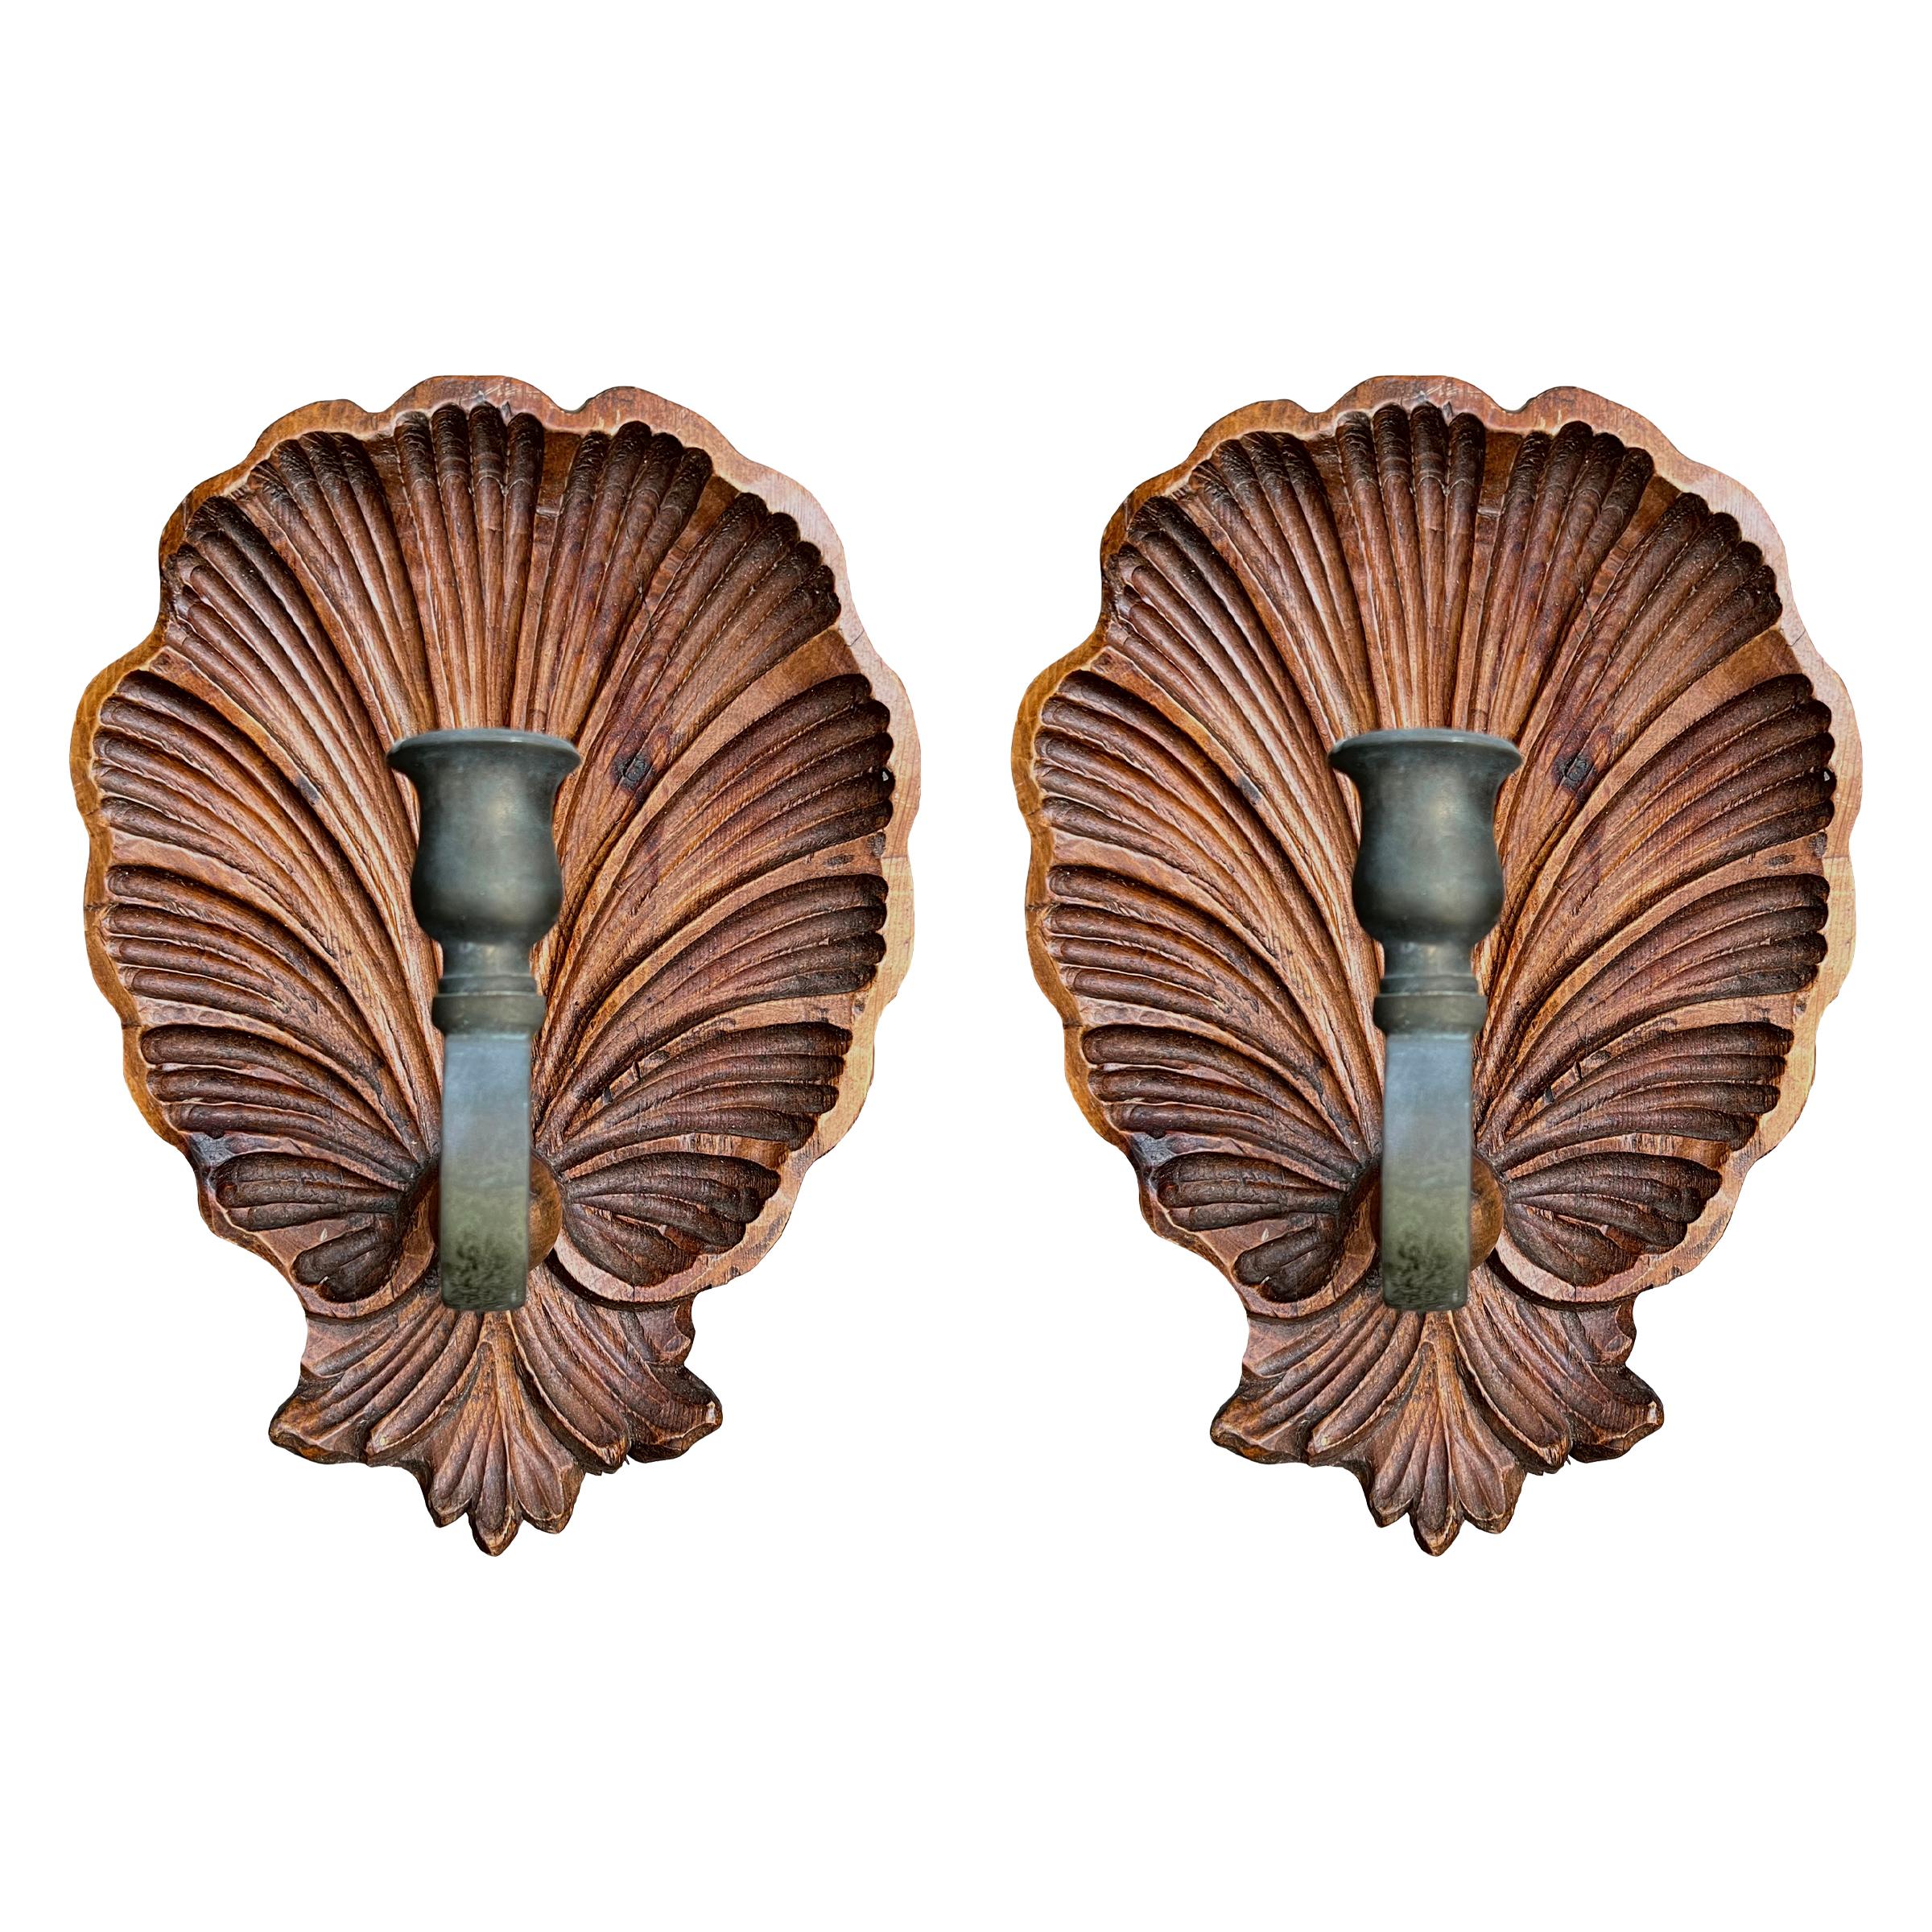 Hand-Carved Pair of Vintage Italian Shell Candle Sconces